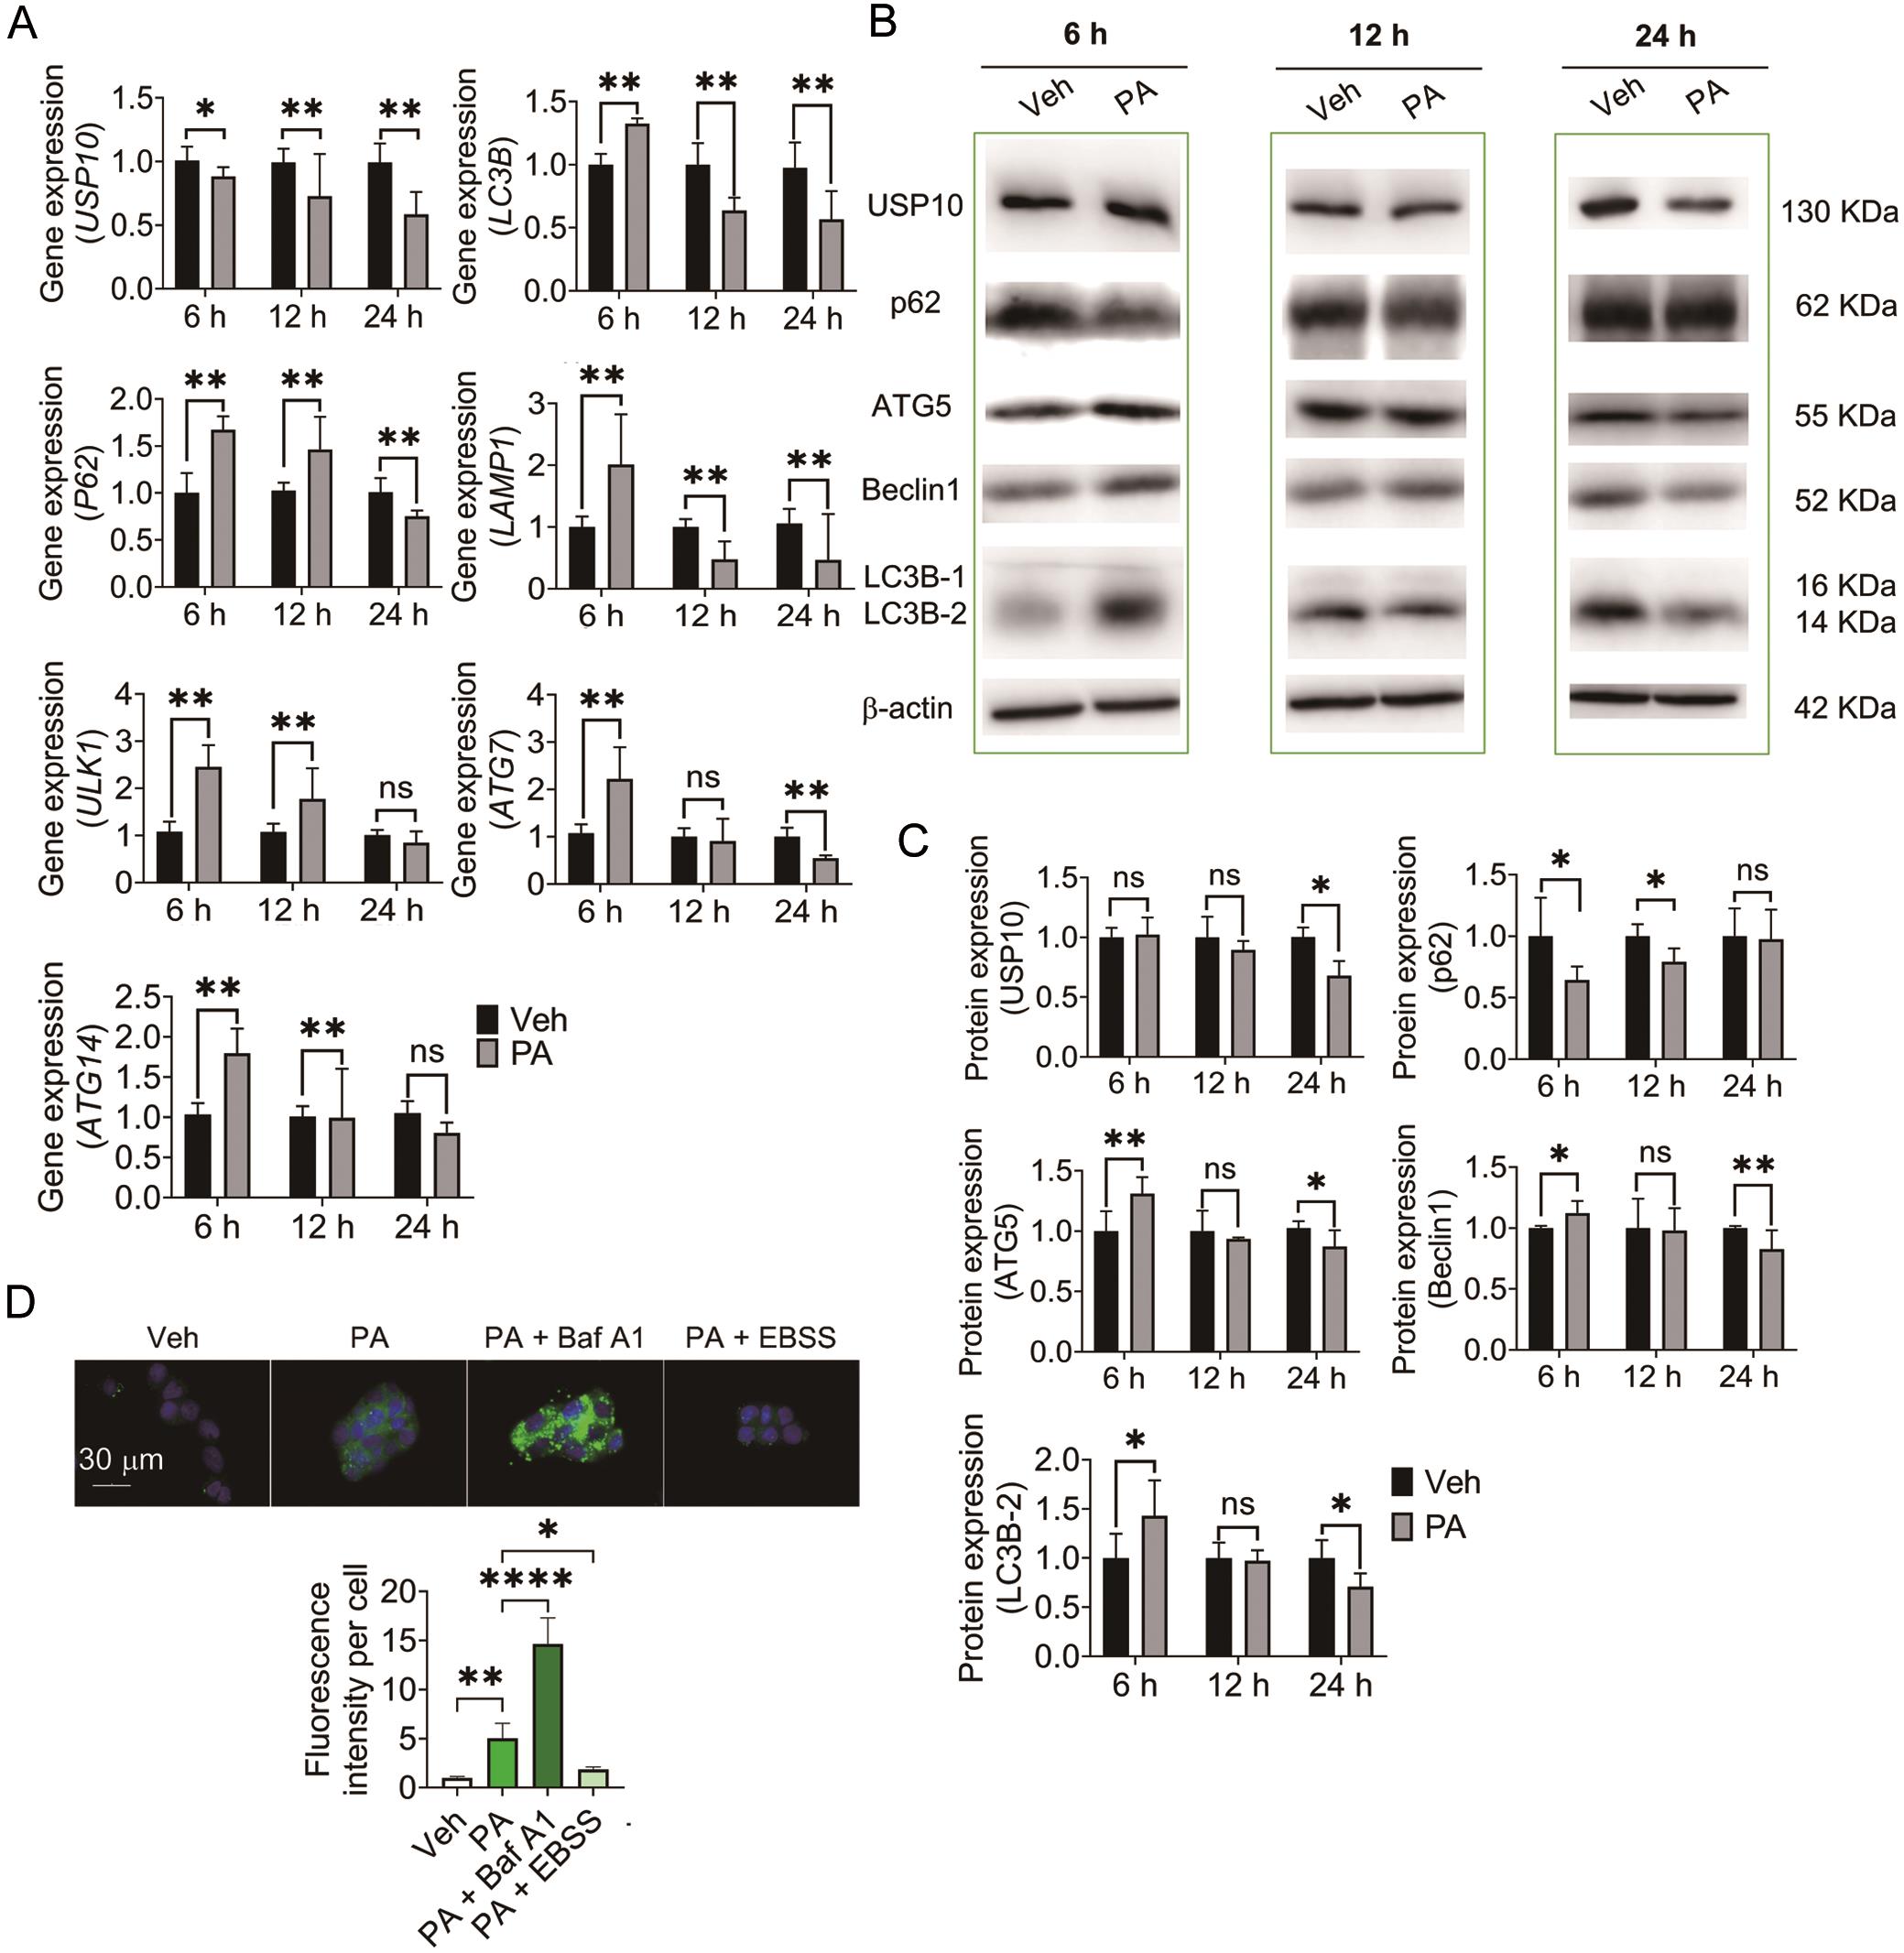 PA affected autophagic activity and expression of USP10 of HepG2 cells.